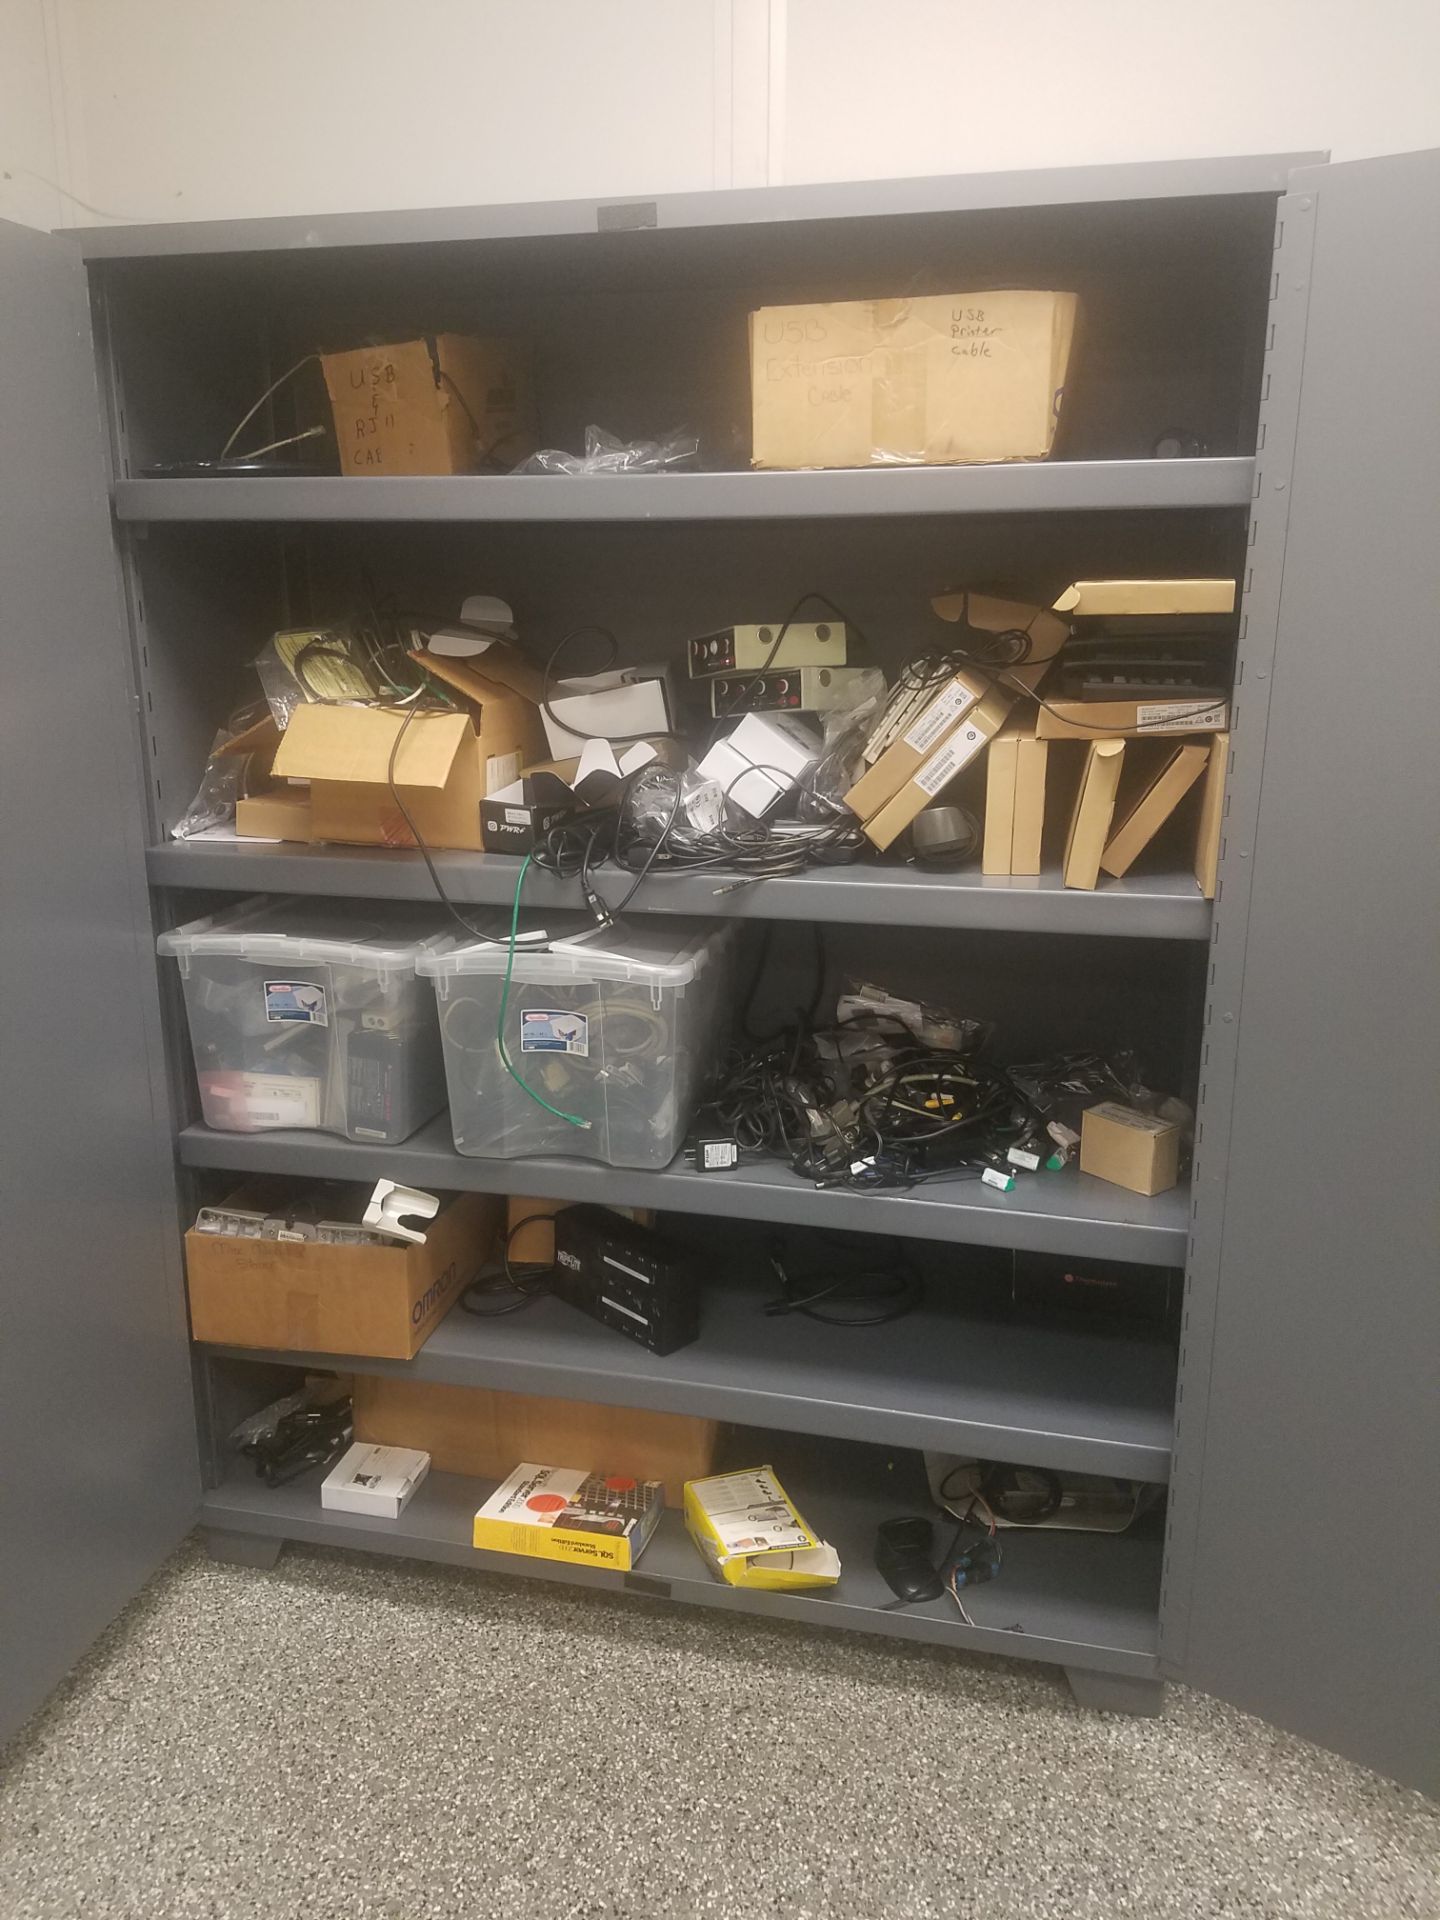 Contents of Cabinet, Cables, software, misc IT items